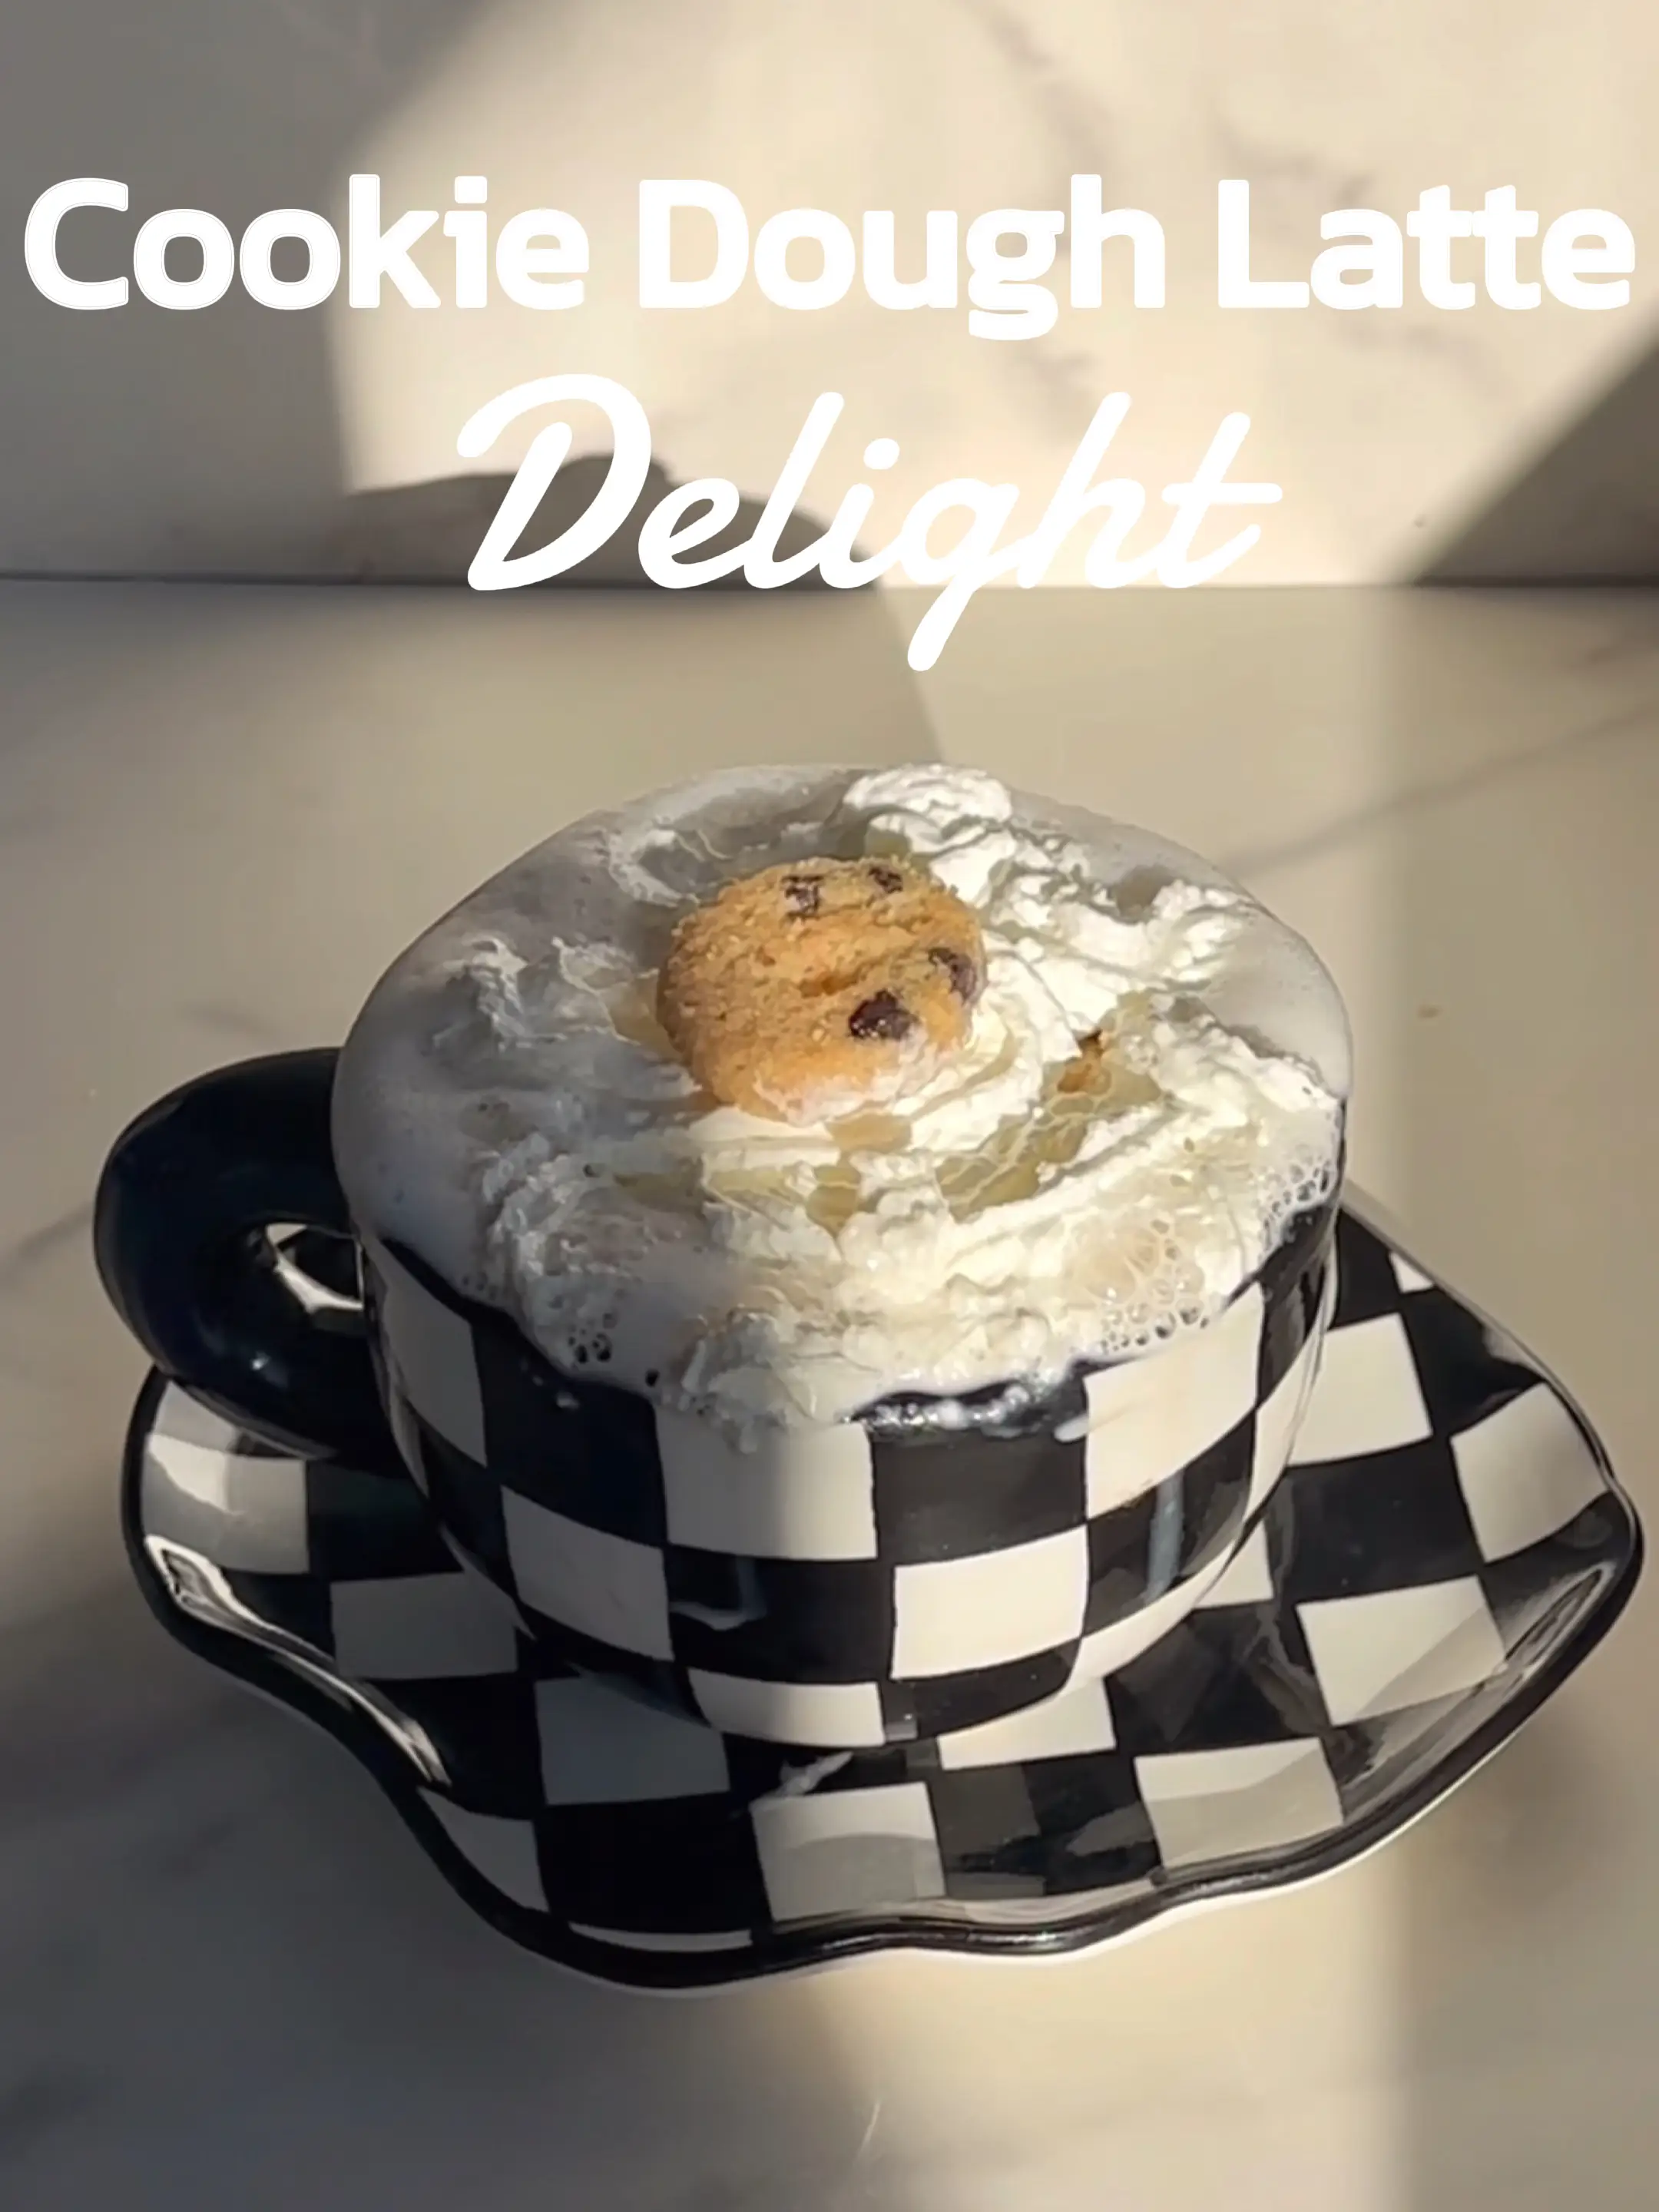 Irresistible Cookie Dough Latte, Video published by Espressoyourslf